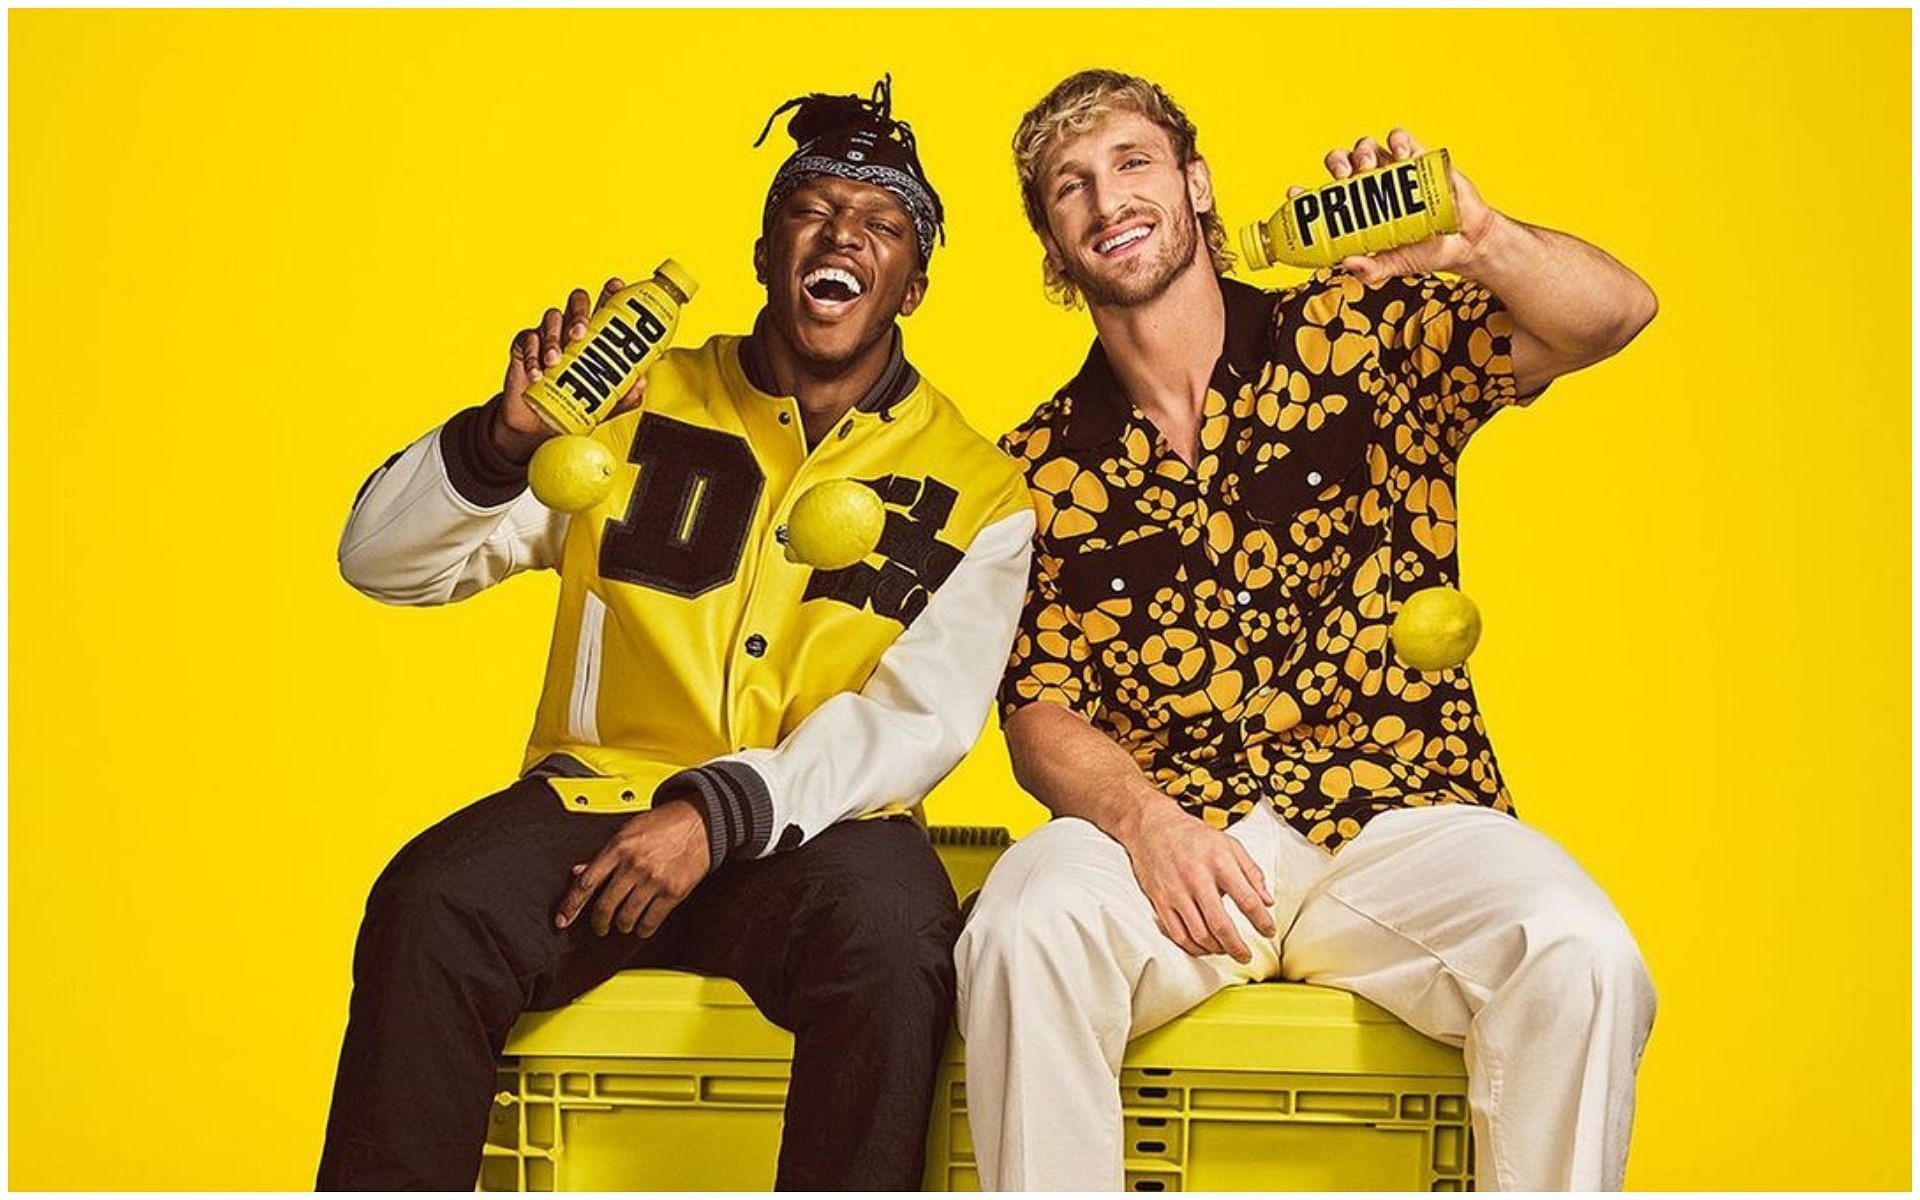 KSI and Logan Paul with Prime energy drink bottles